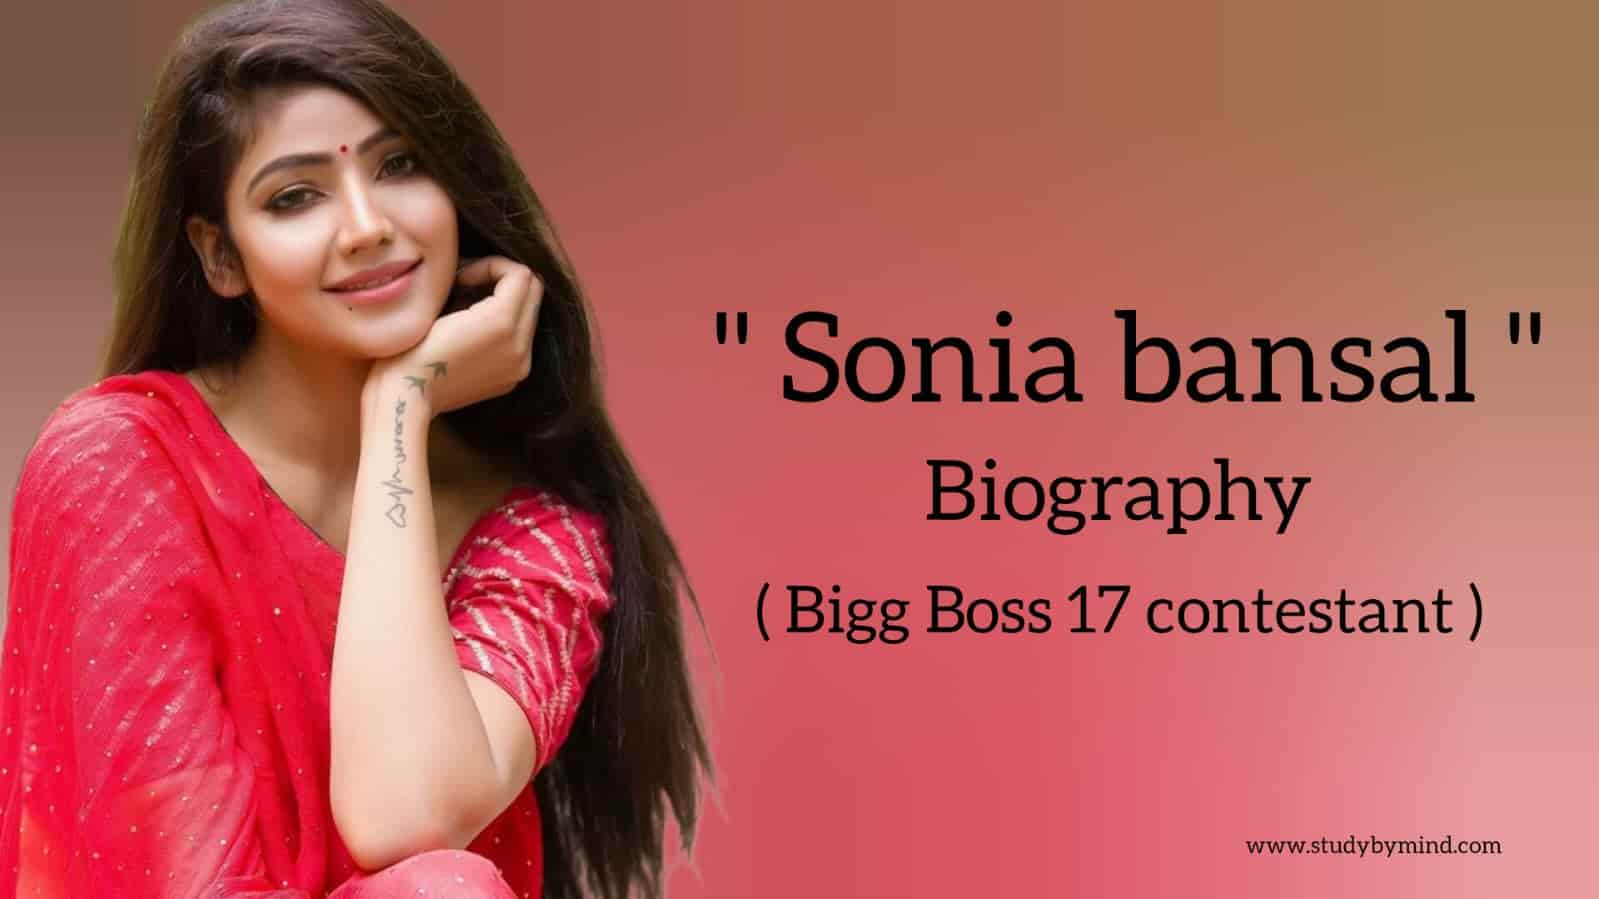 You are currently viewing Sonia bansal biography in english (Contestant of Bigg Boss 17)